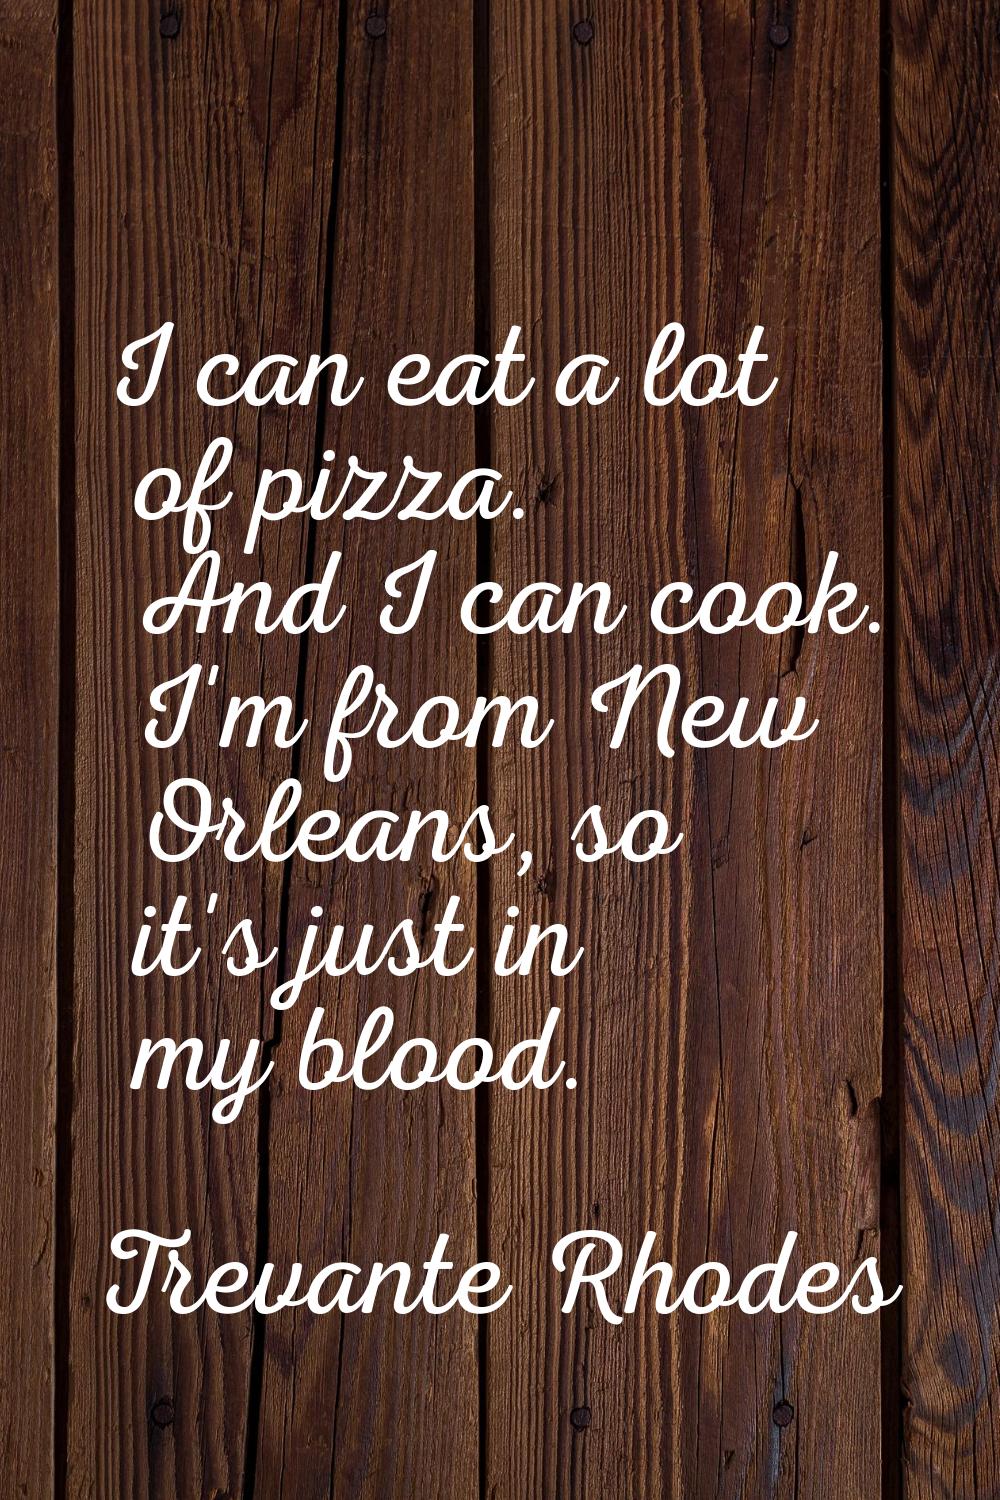 I can eat a lot of pizza. And I can cook. I'm from New Orleans, so it's just in my blood.